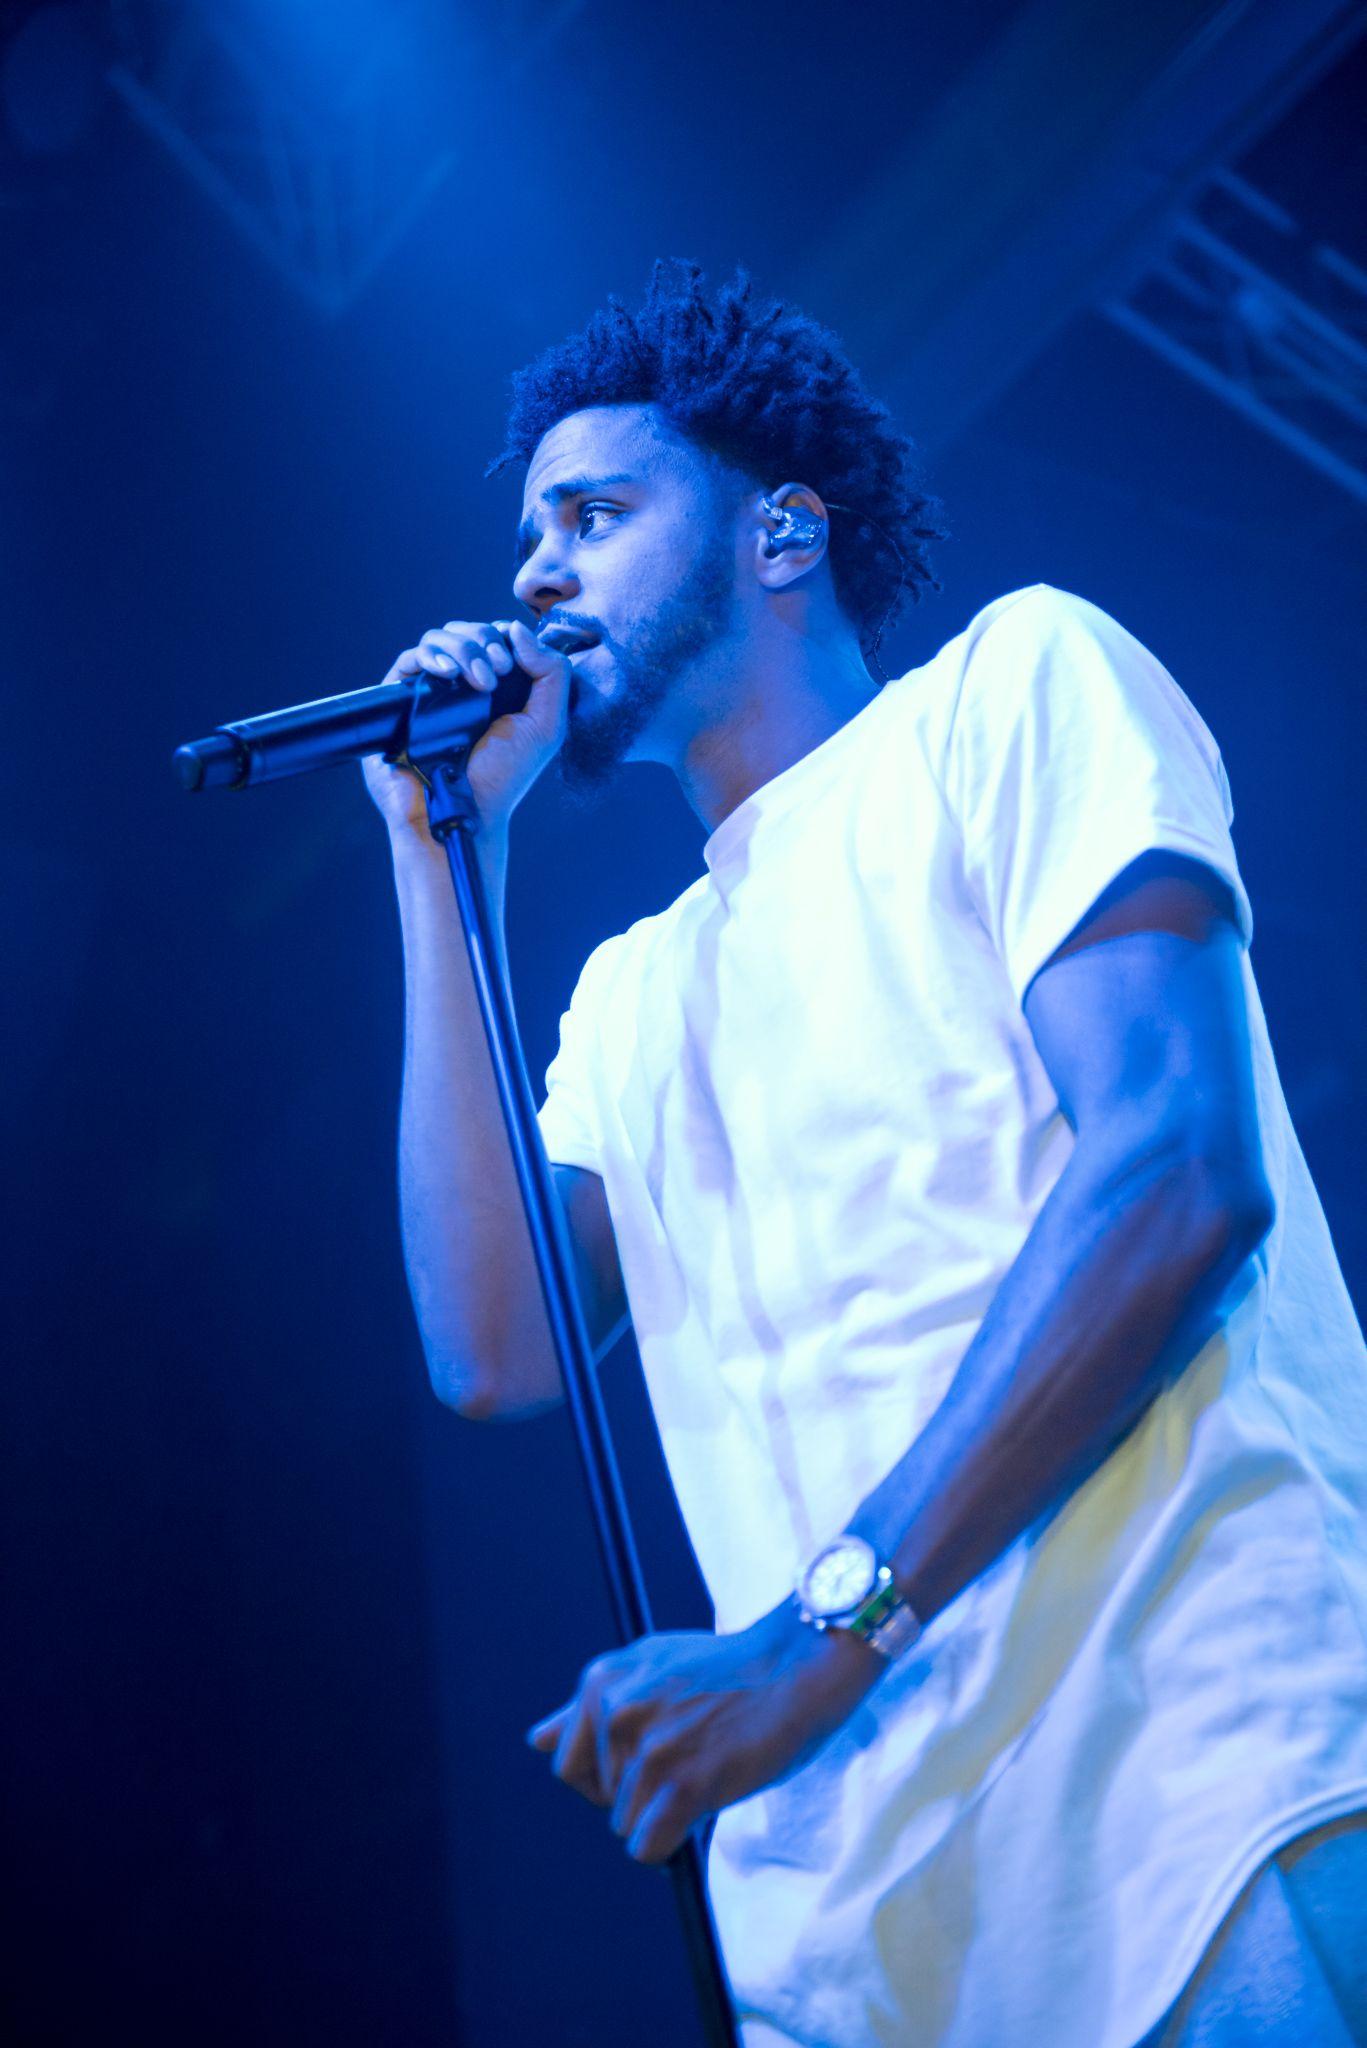 J. Cole and 21 Savage hit the court at Oakland Arena | PHOTOS